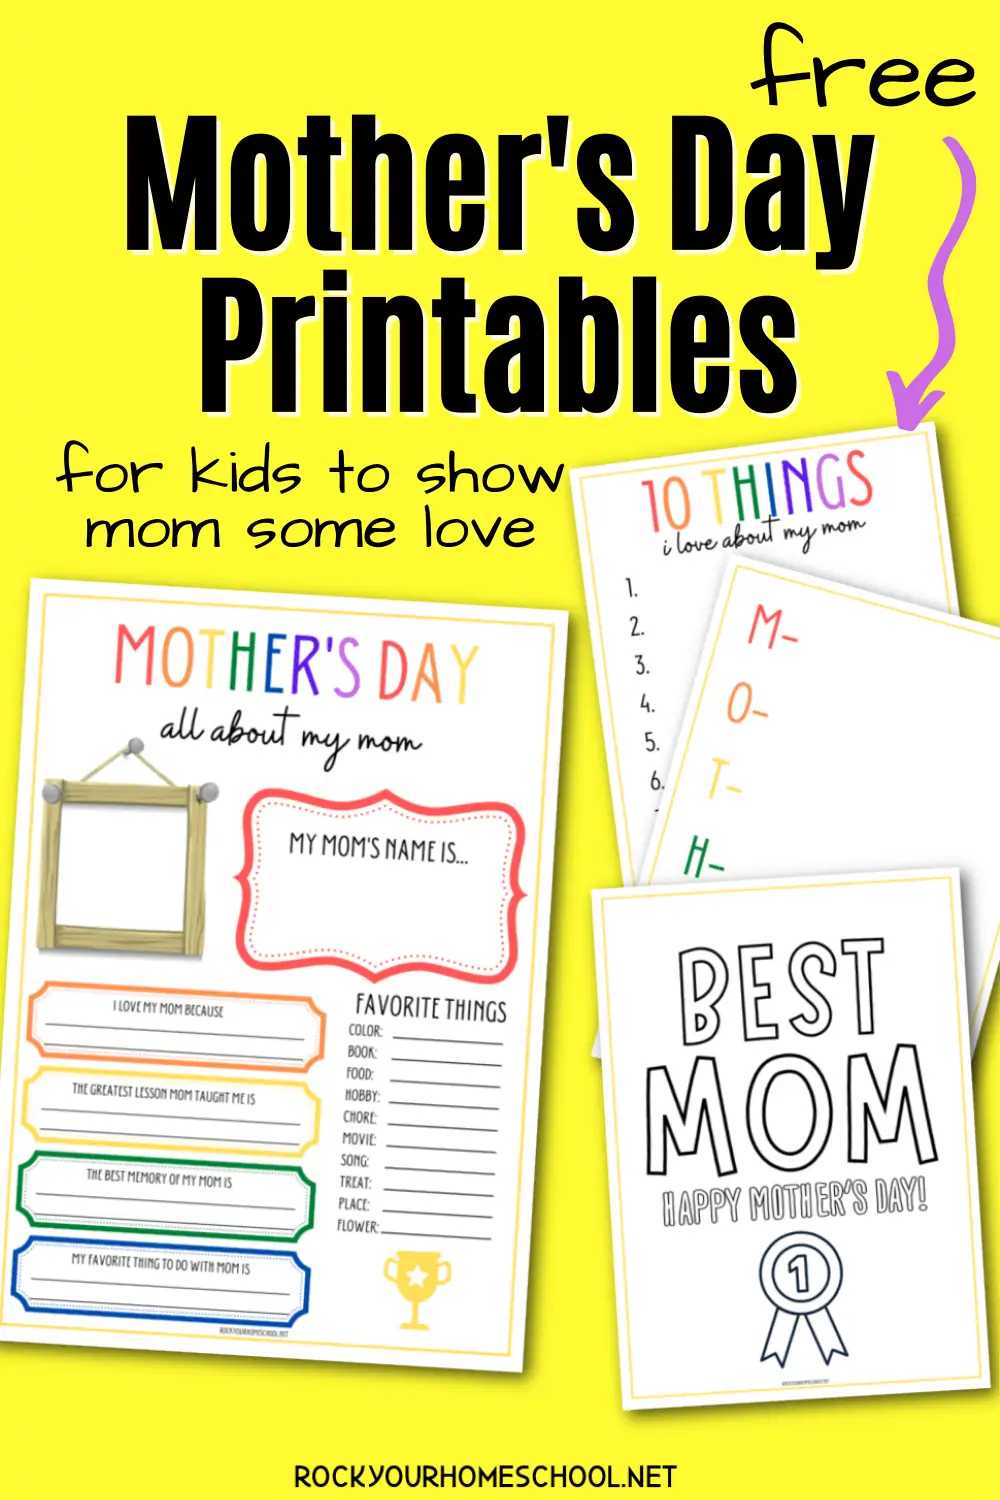 Free Mother’s Day Printables for Kids to Show Mom Love